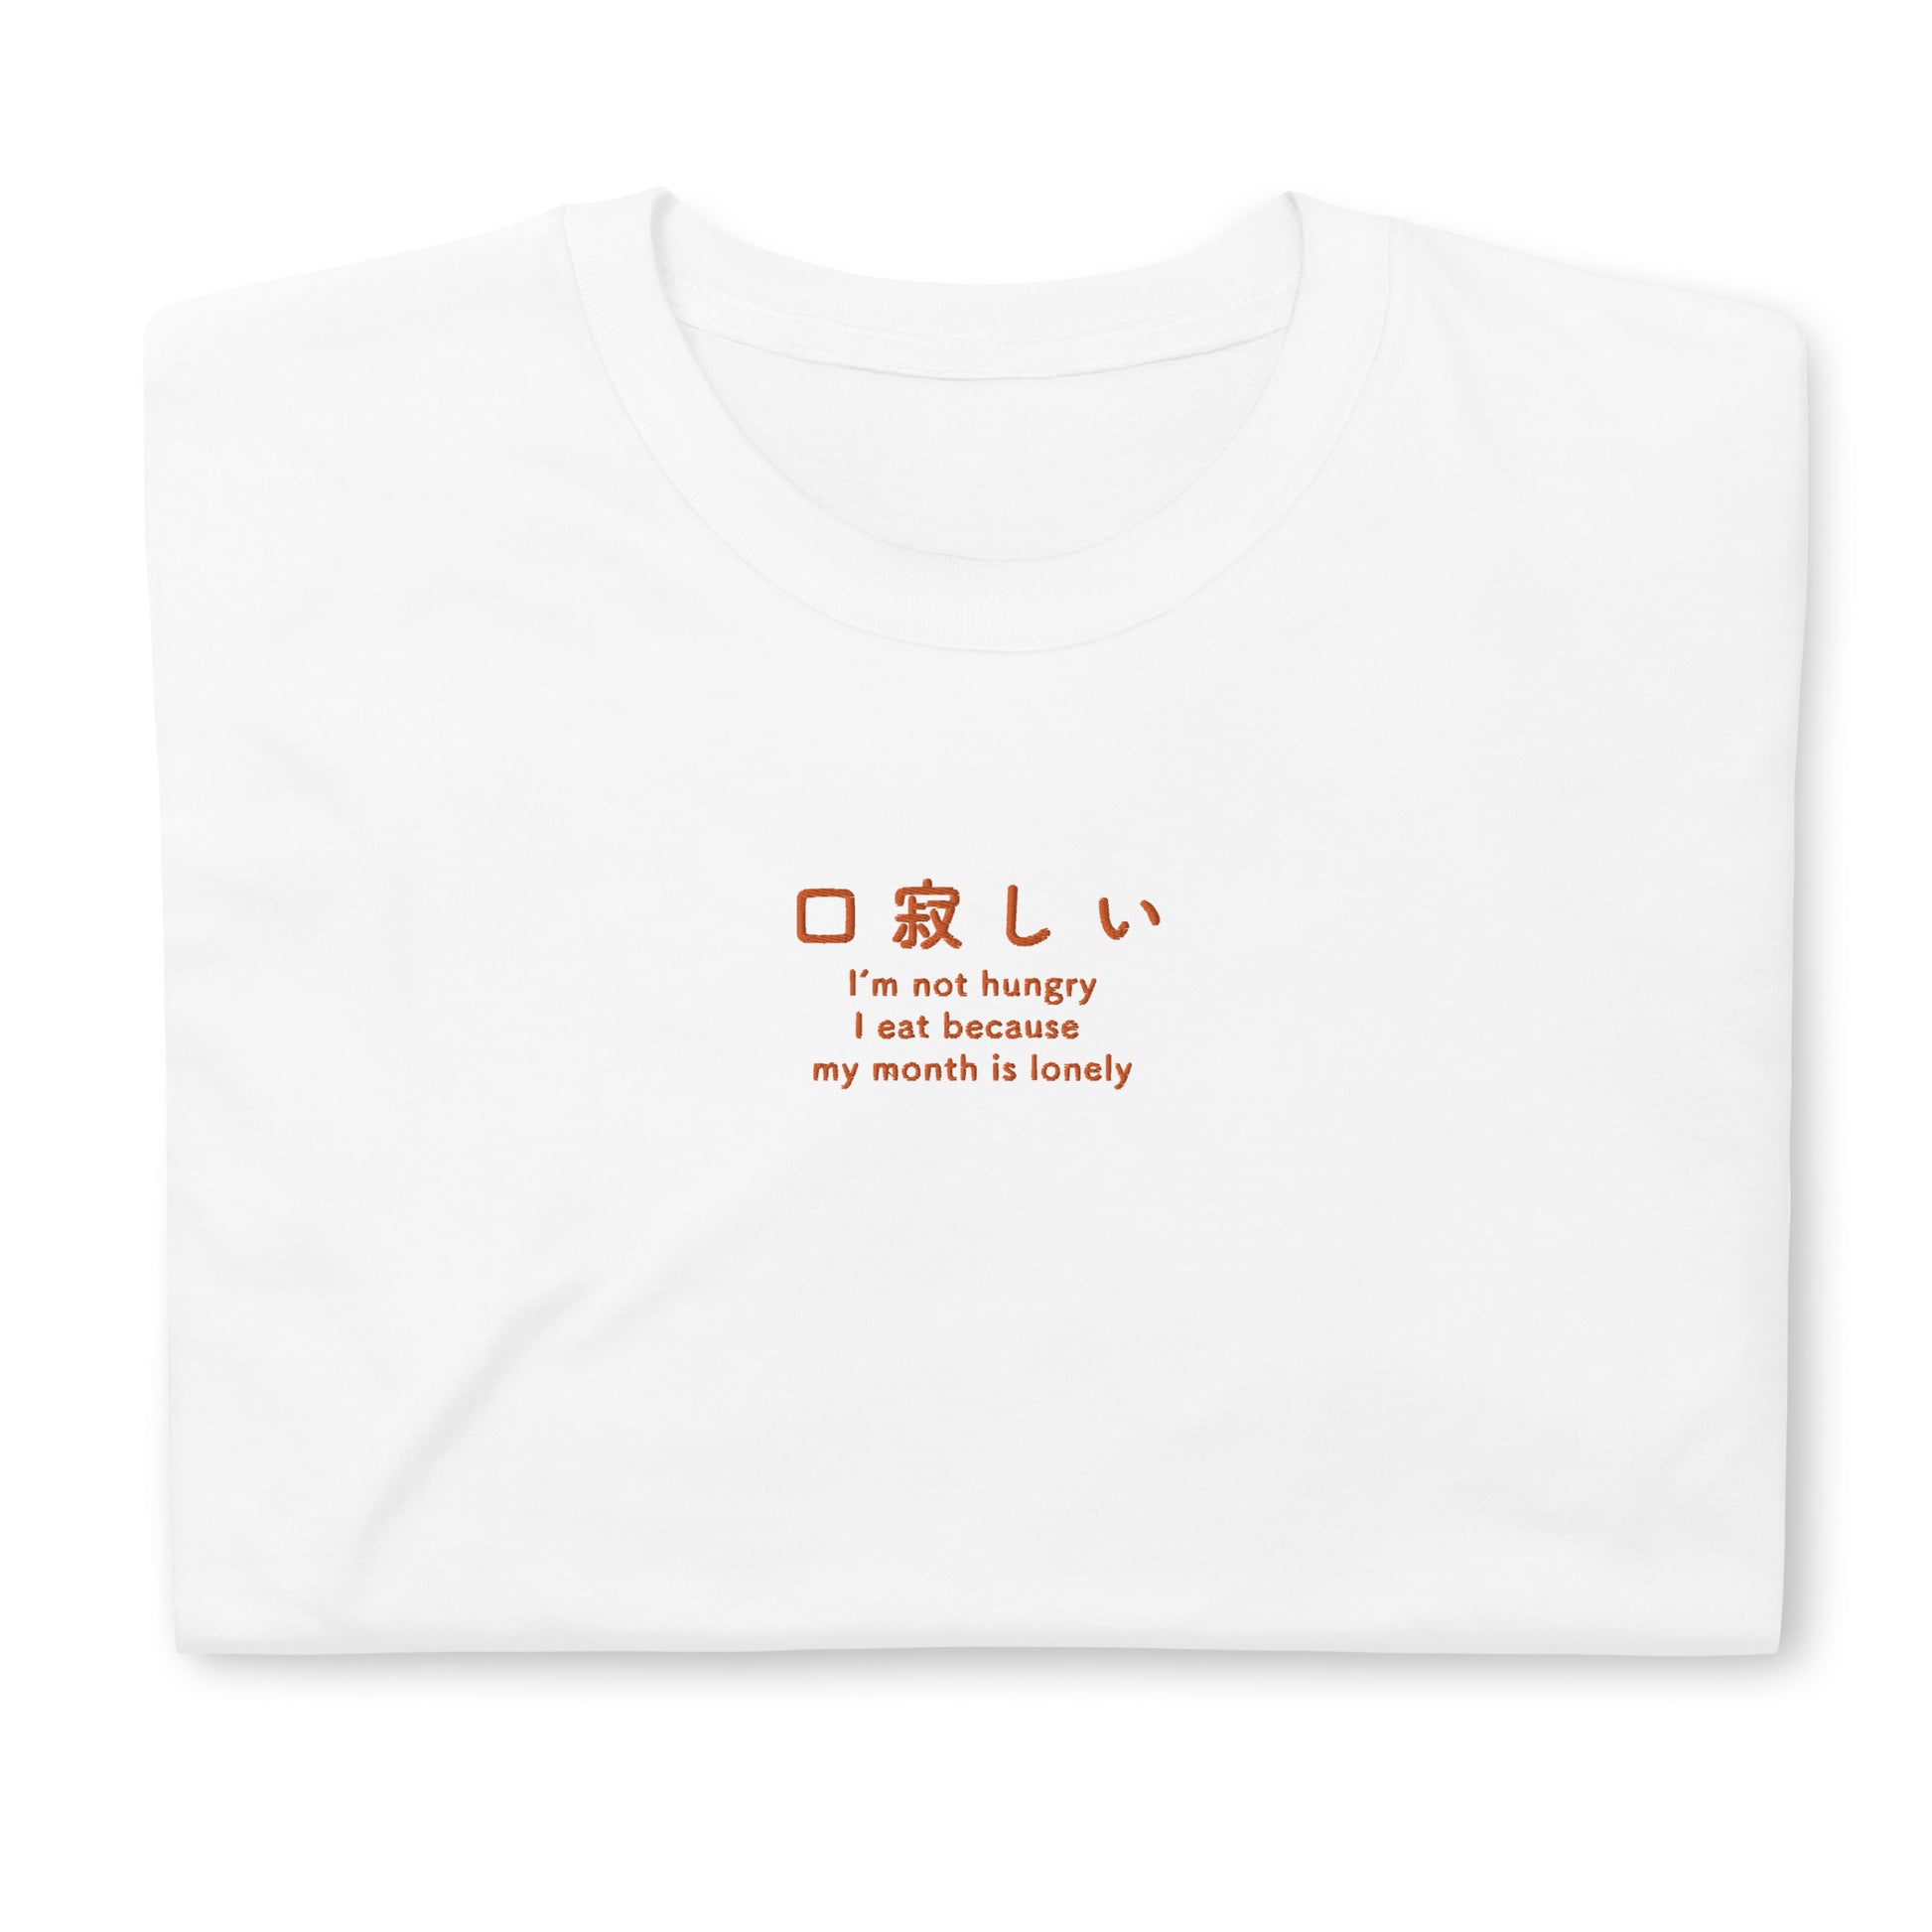 White High Quality Tee - Front Design with an Orange Embroidery "kuchisabishi" in Japanese and English